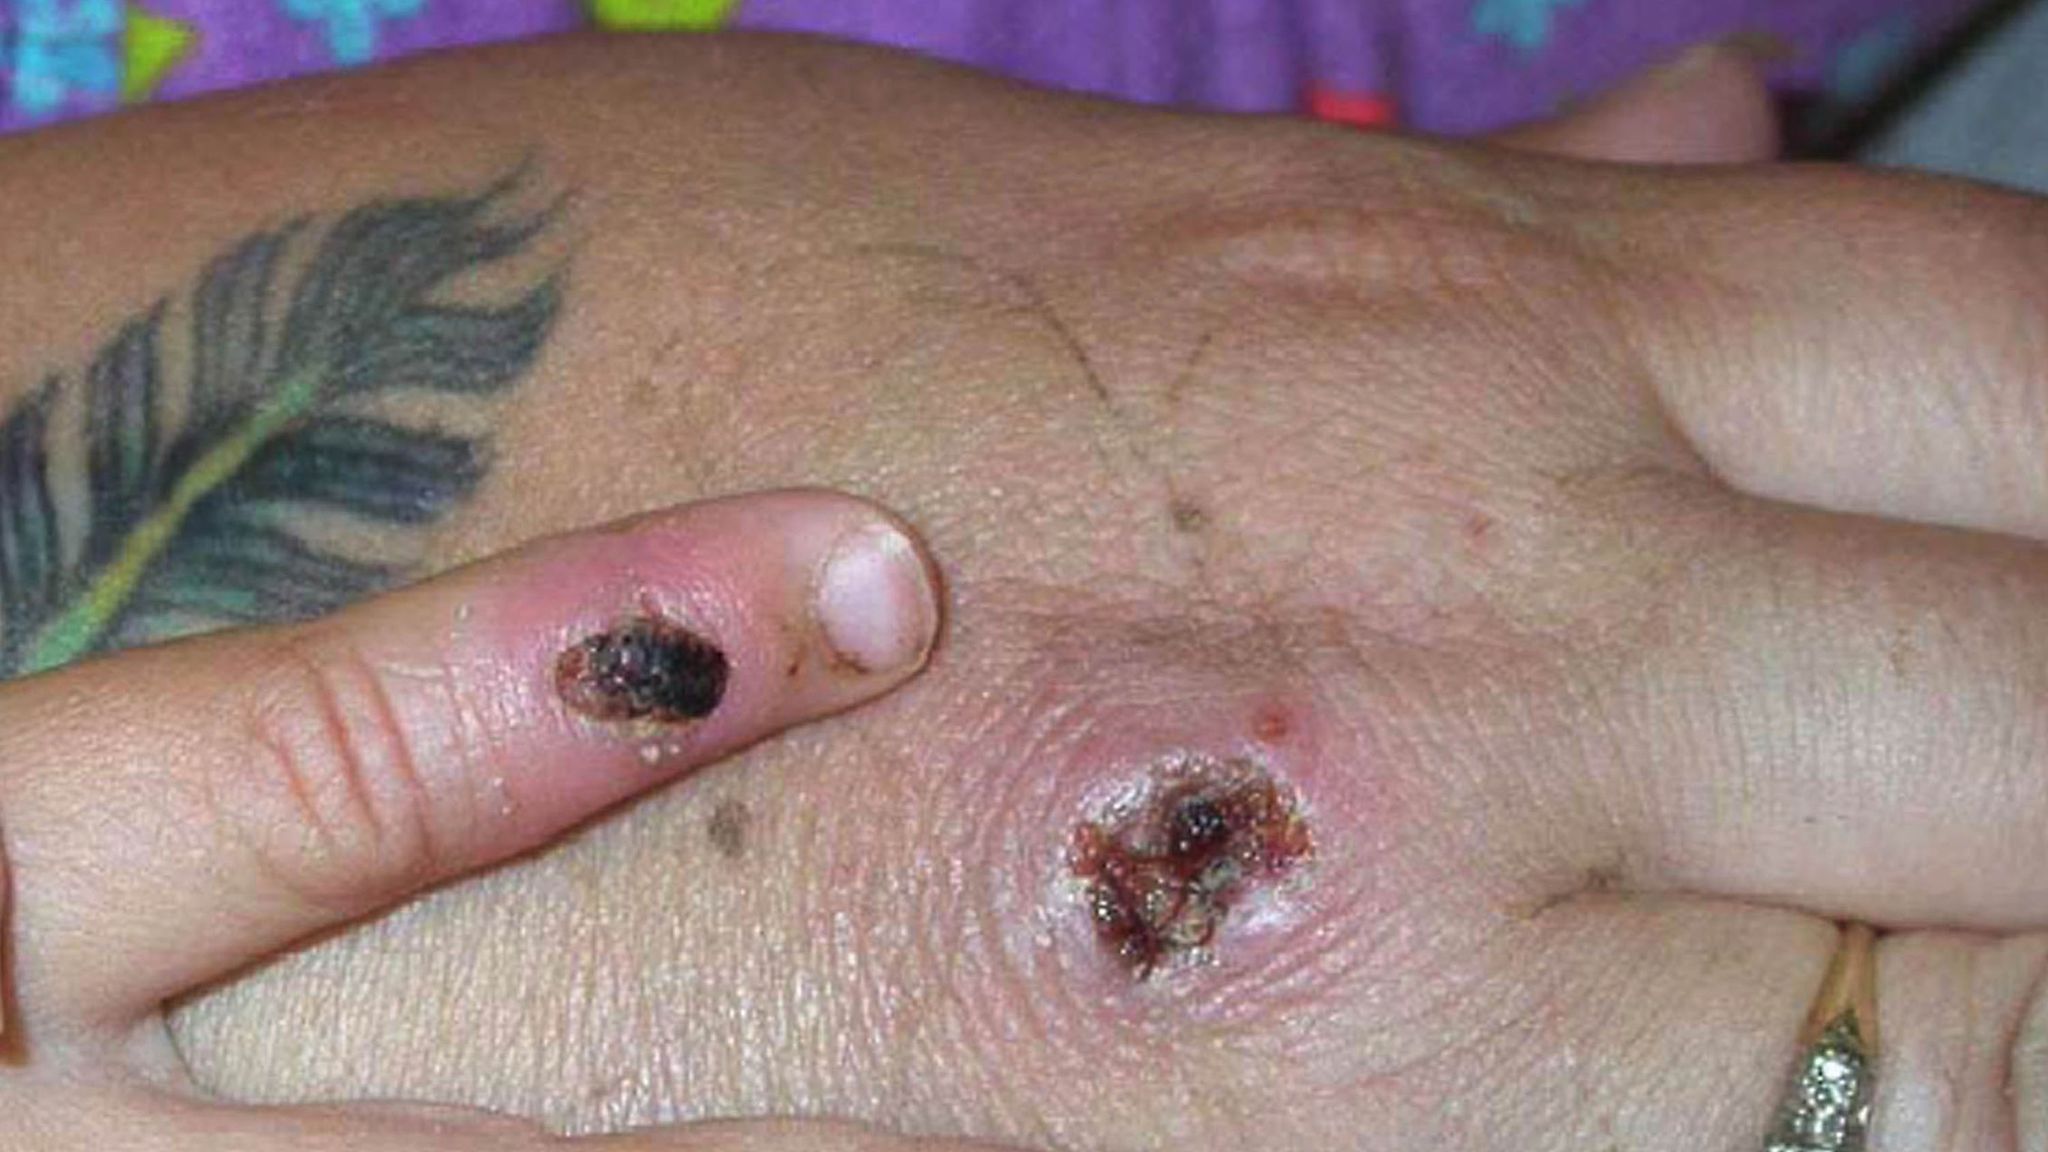 Monkeypox Uk - Monkeypox virus: Infection spread in UK by clothes and